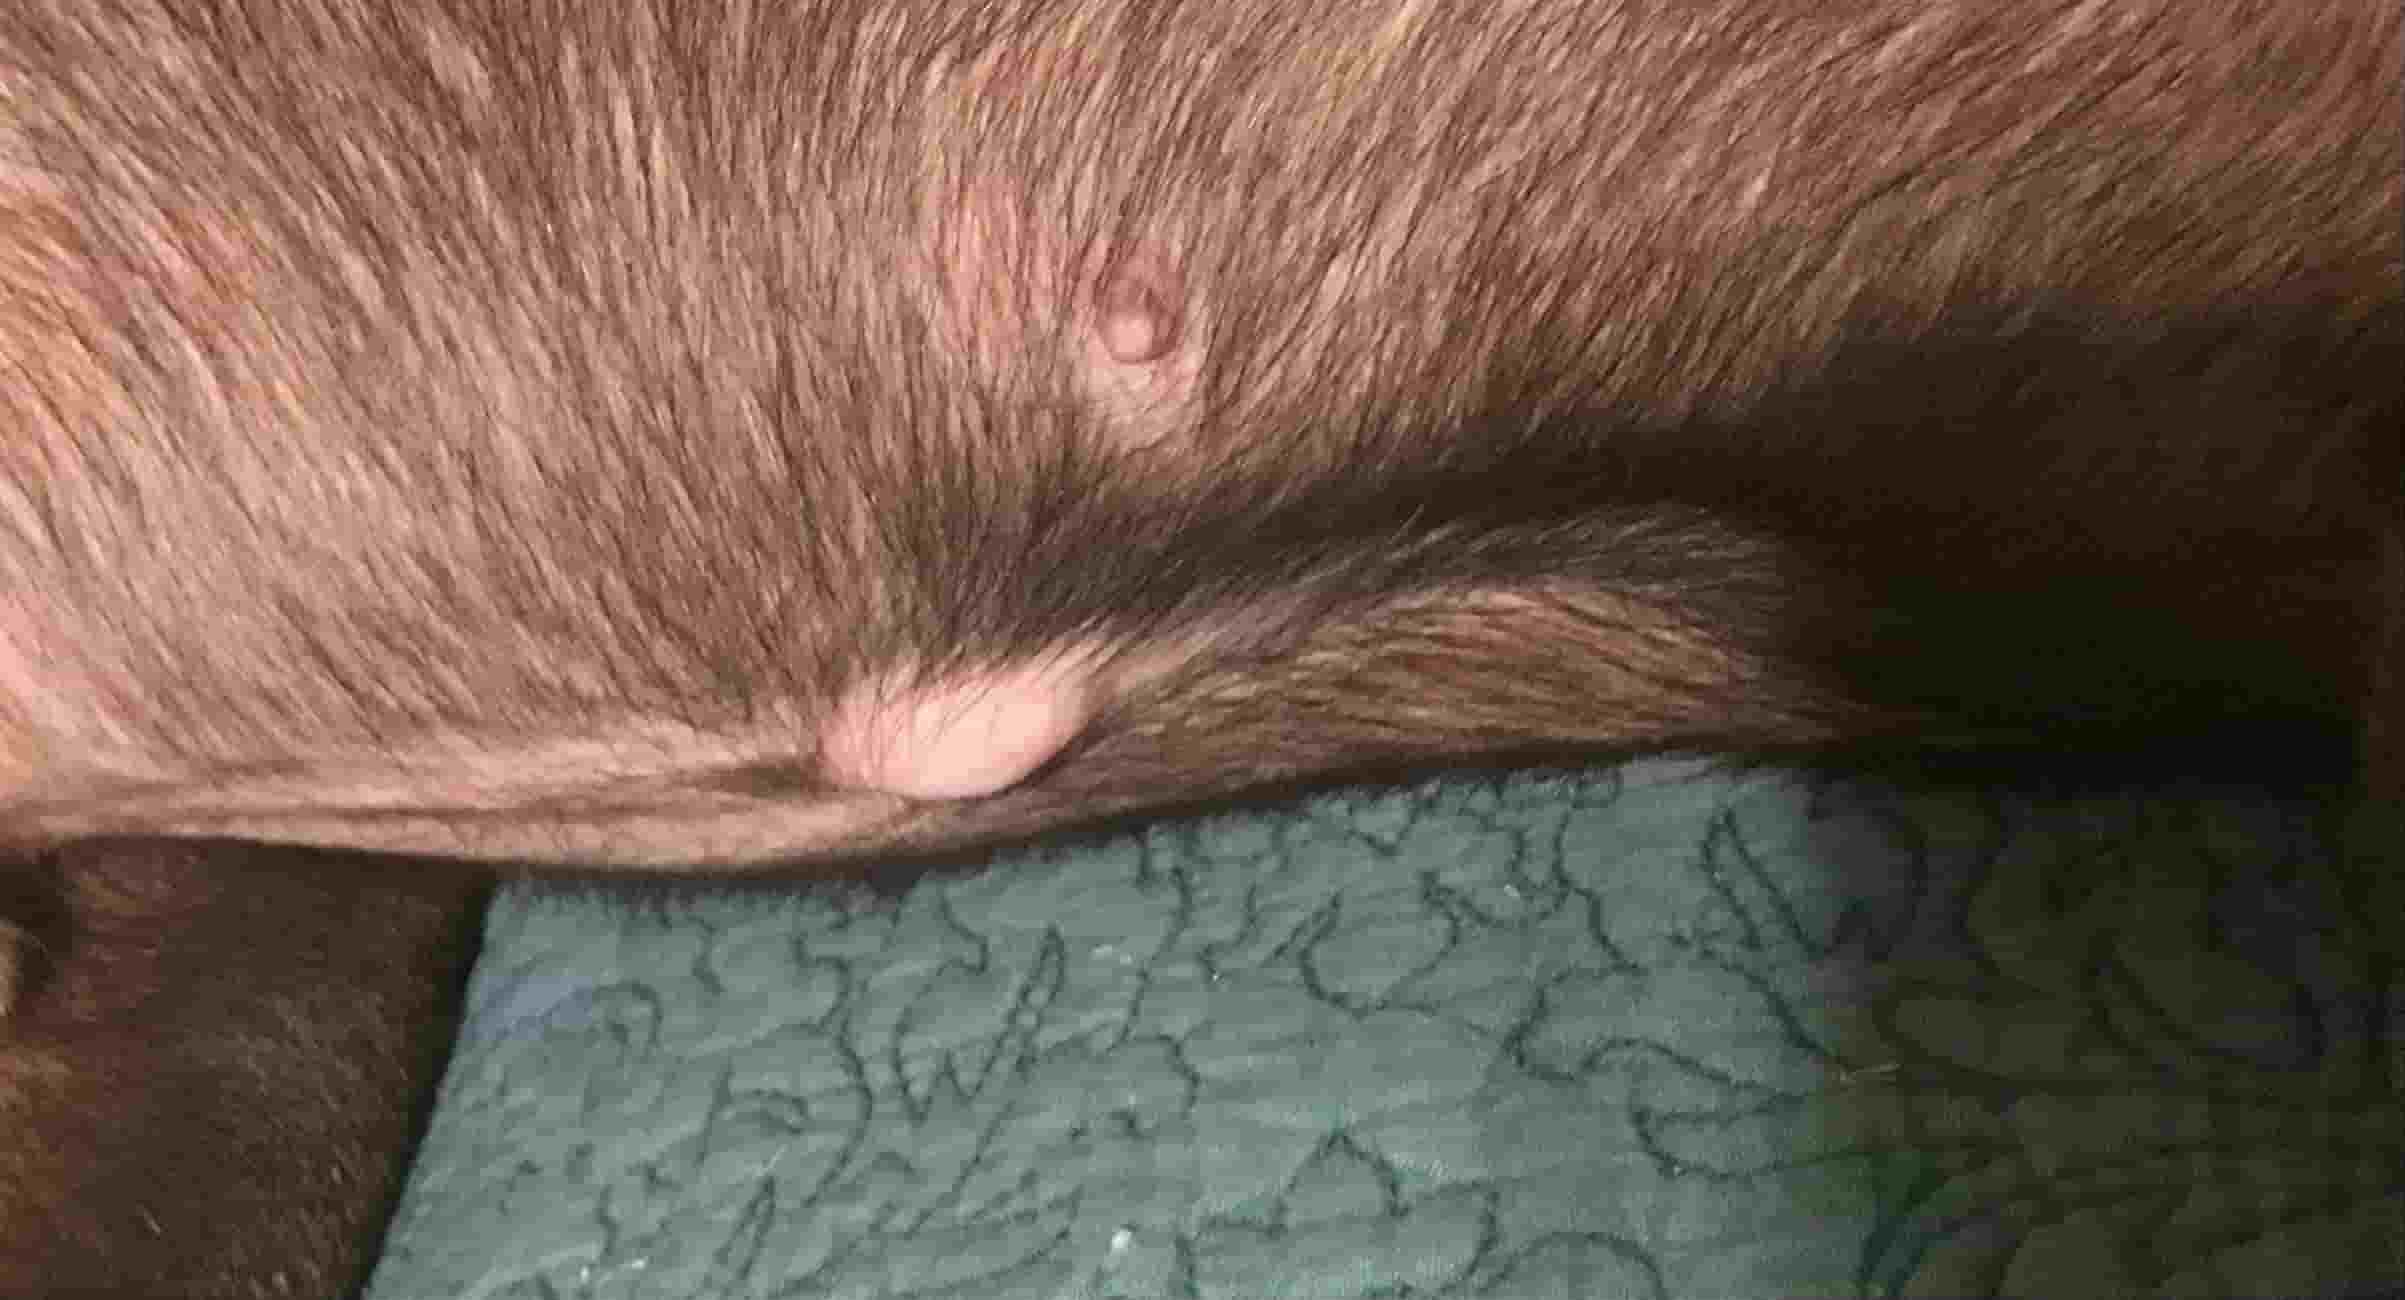 My dog has bumps under her fur. What is the cause and treatment?